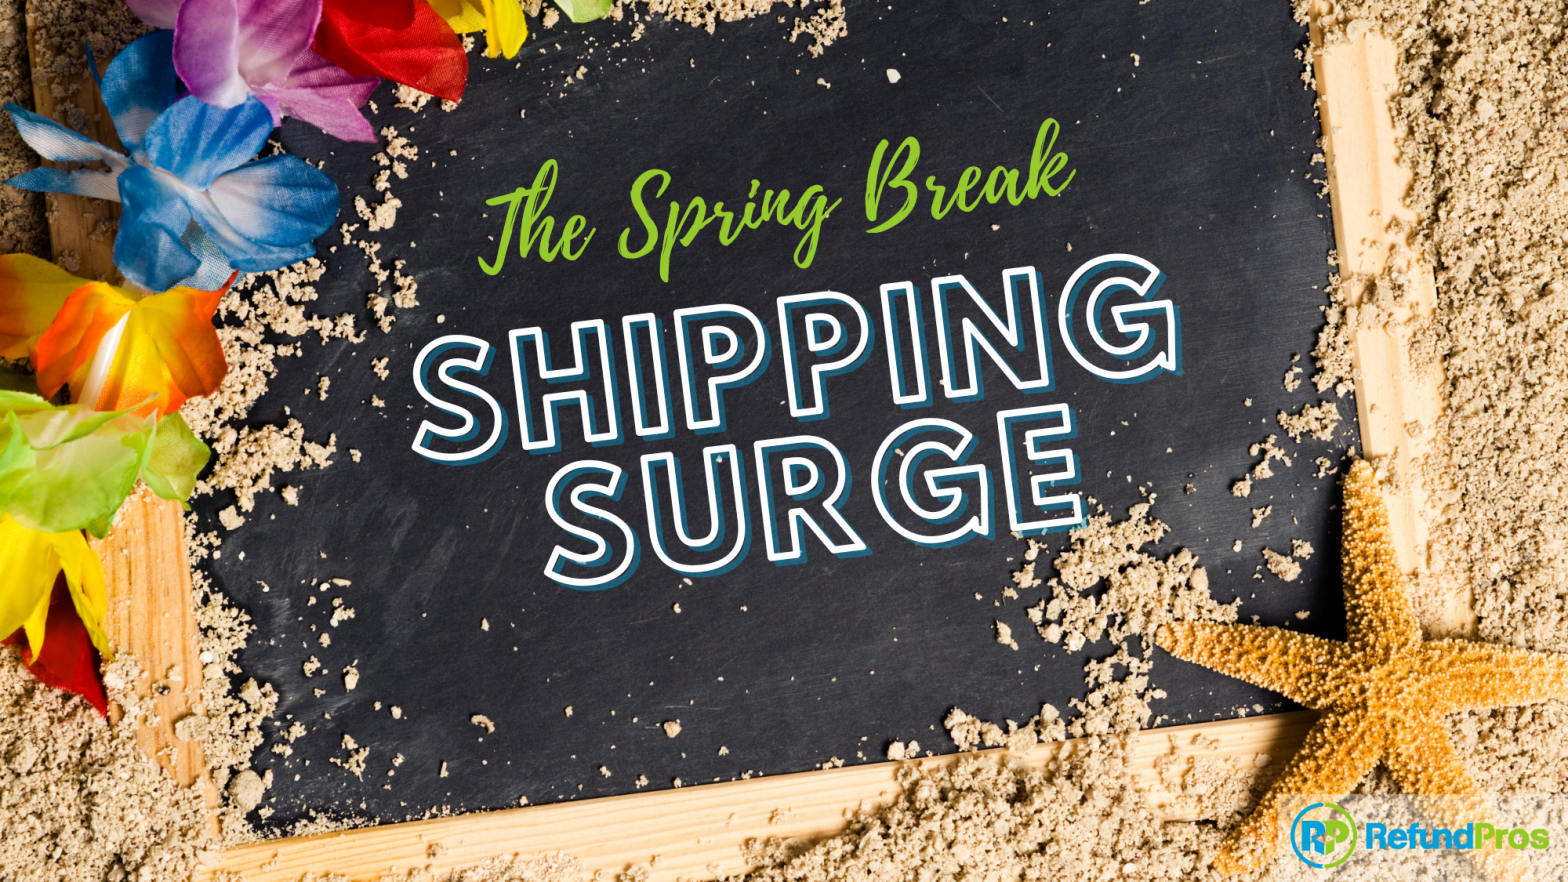 Advice for retailers with the upcoming Spring Break